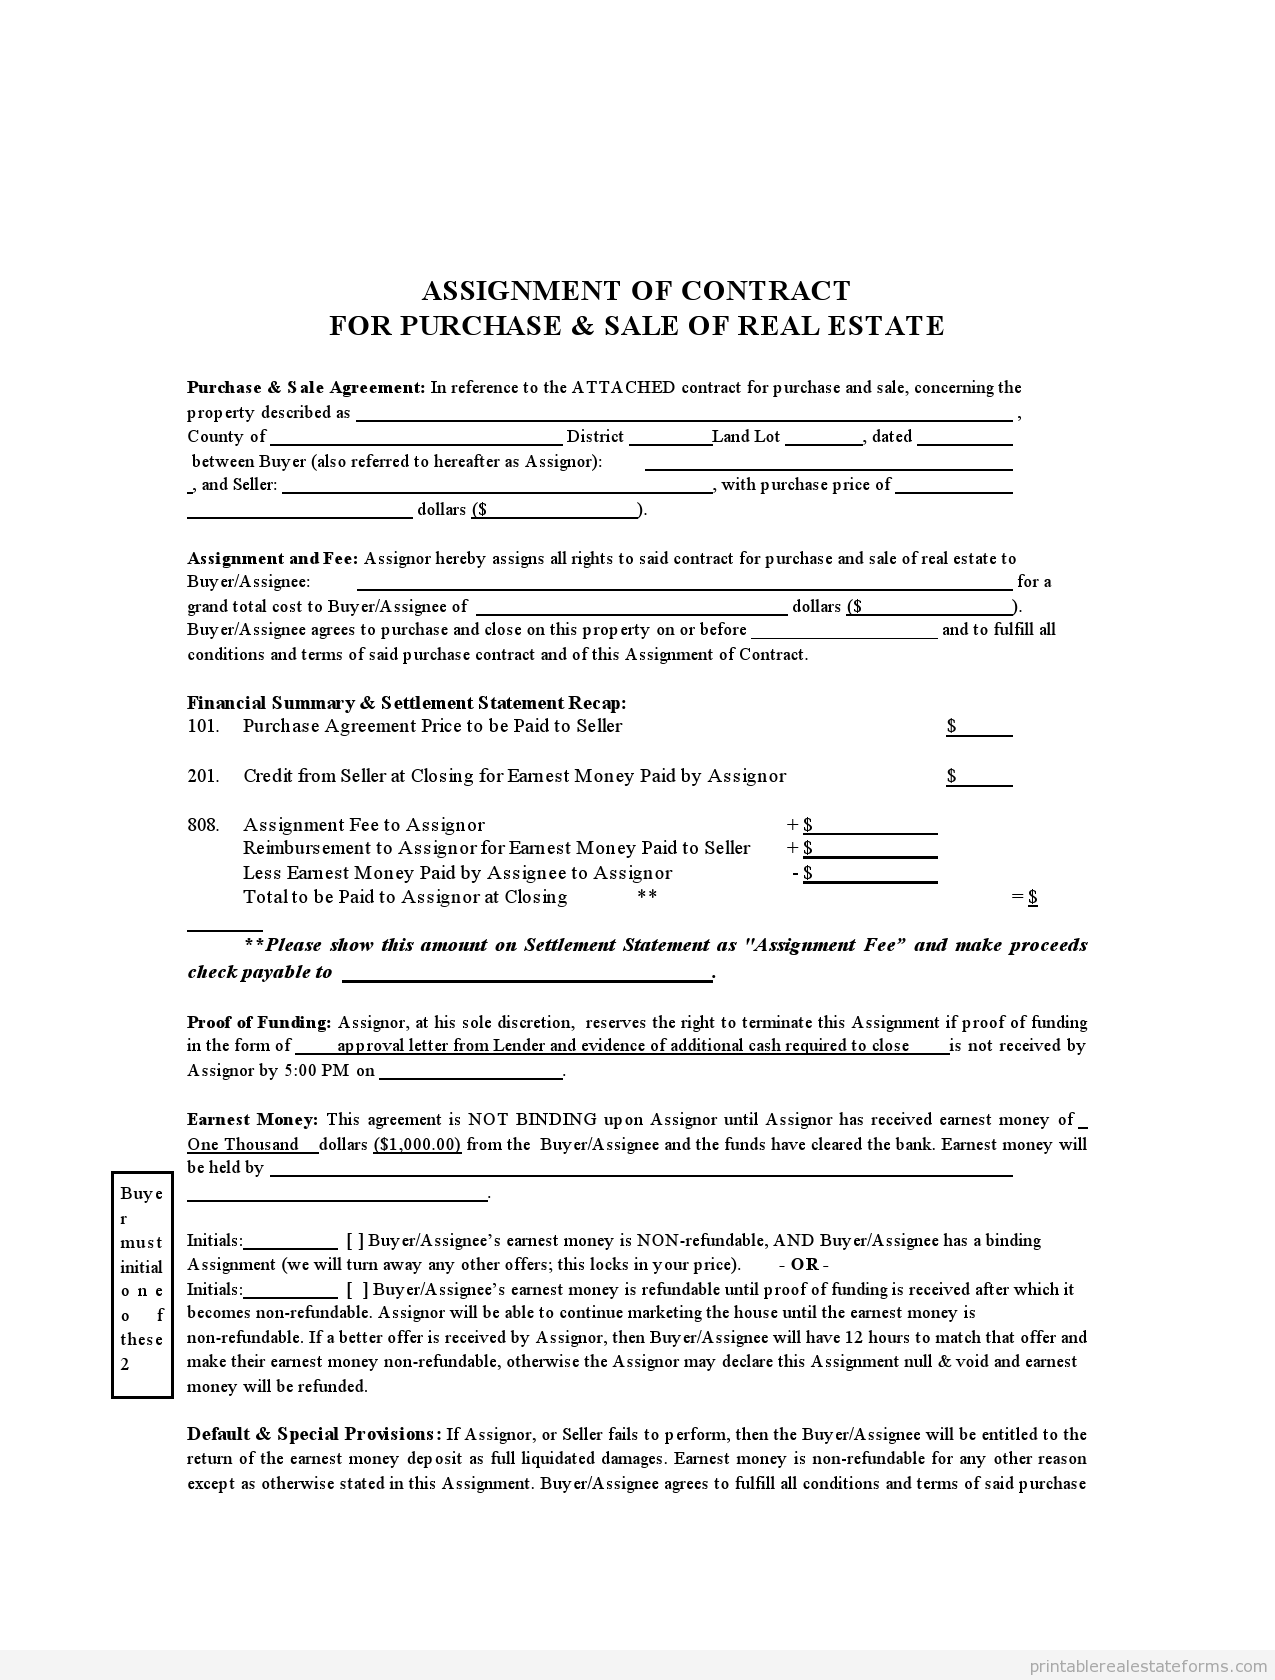 Assignment of a purchase agreement